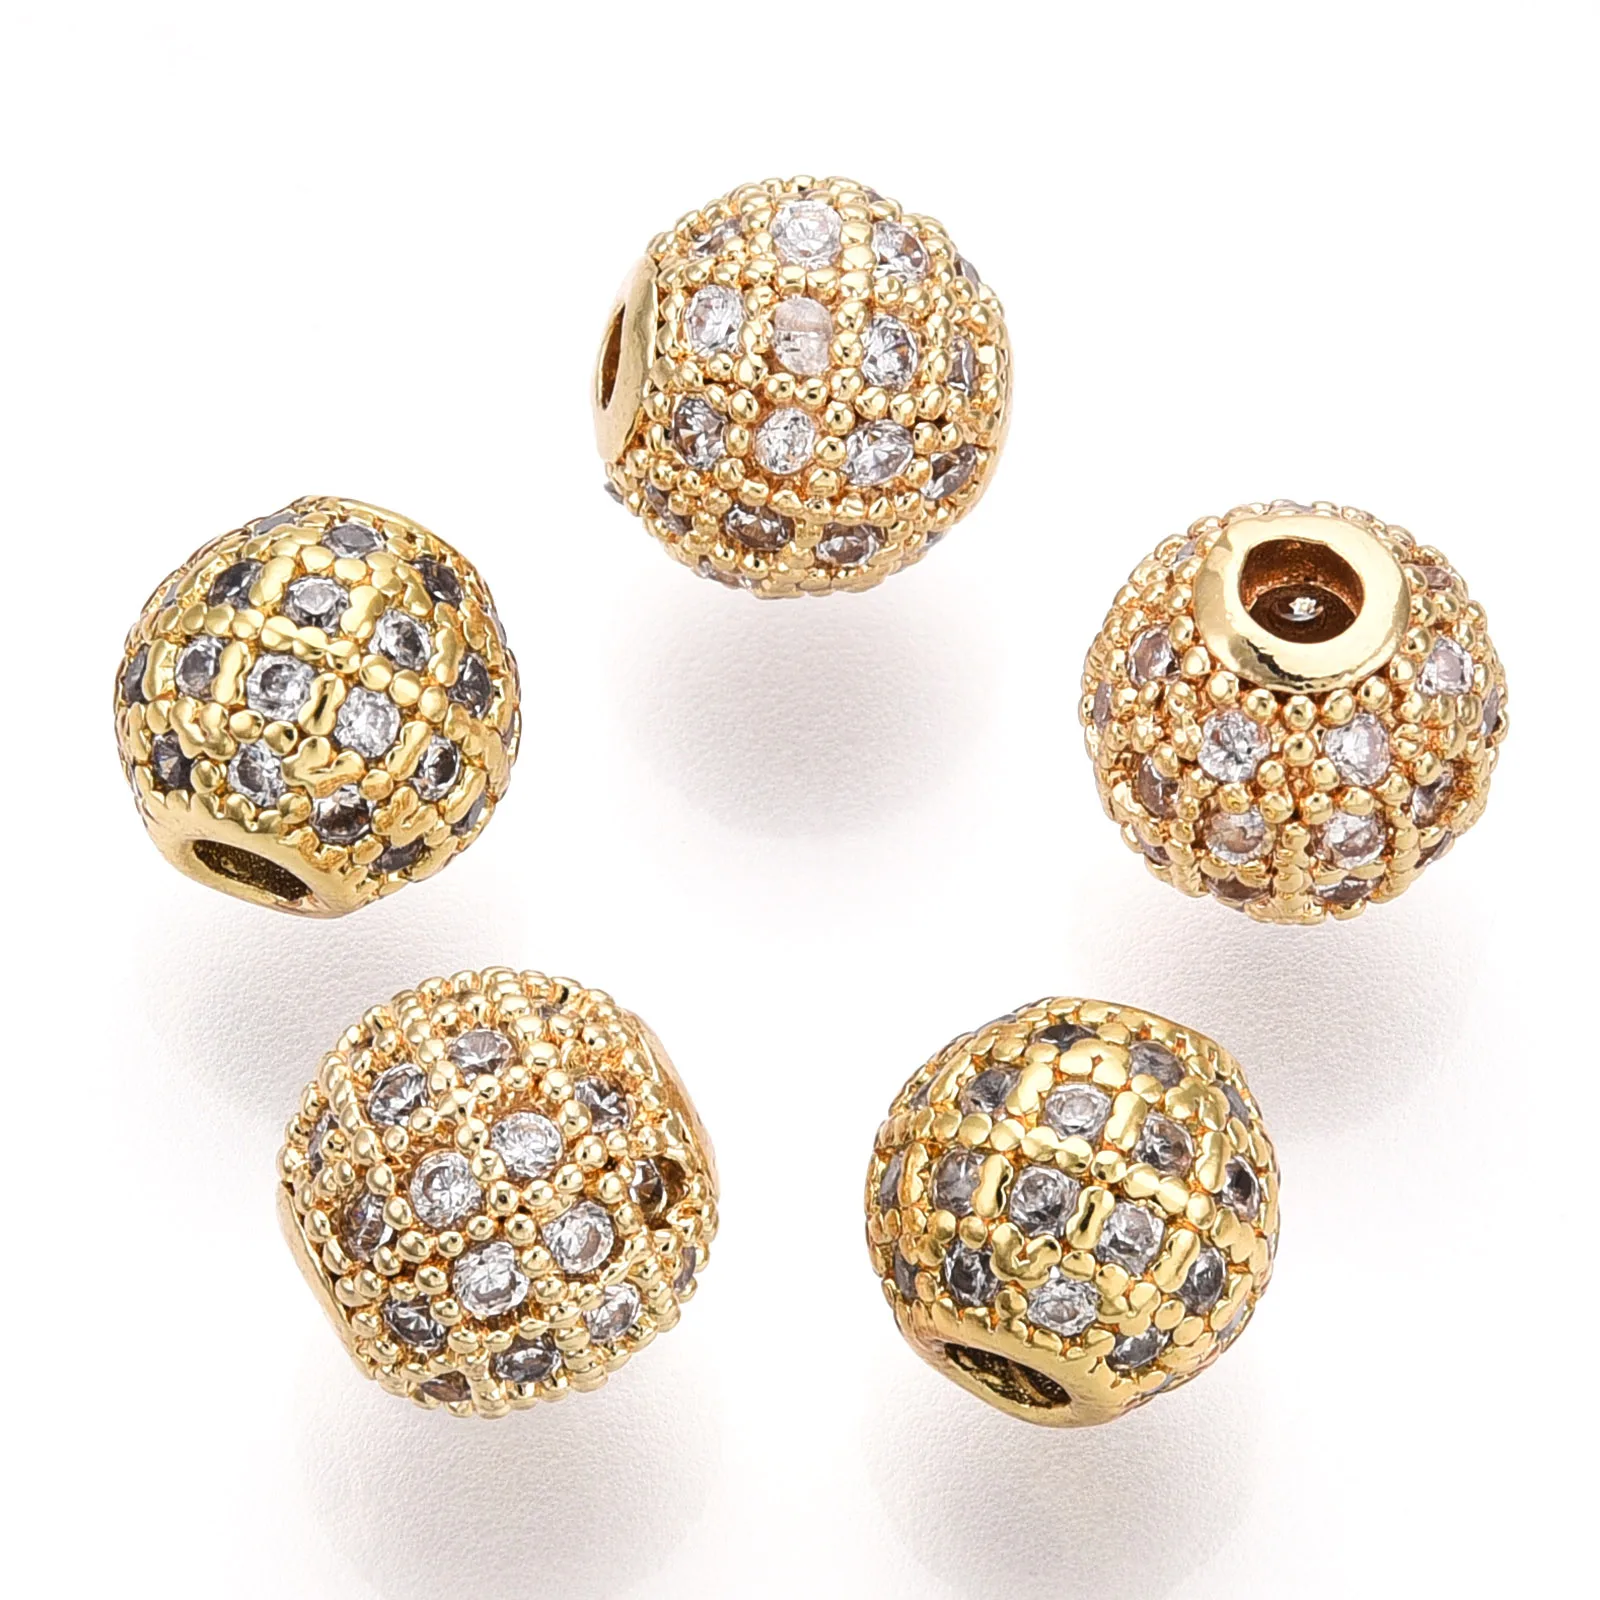 

10pcs 8mm Brass Cubic Zirconia Beads Crystal Rhinestone Spacer Beads for Jewelry Making DIY Bracelet Necklace 8x7mm Hole: 2mm